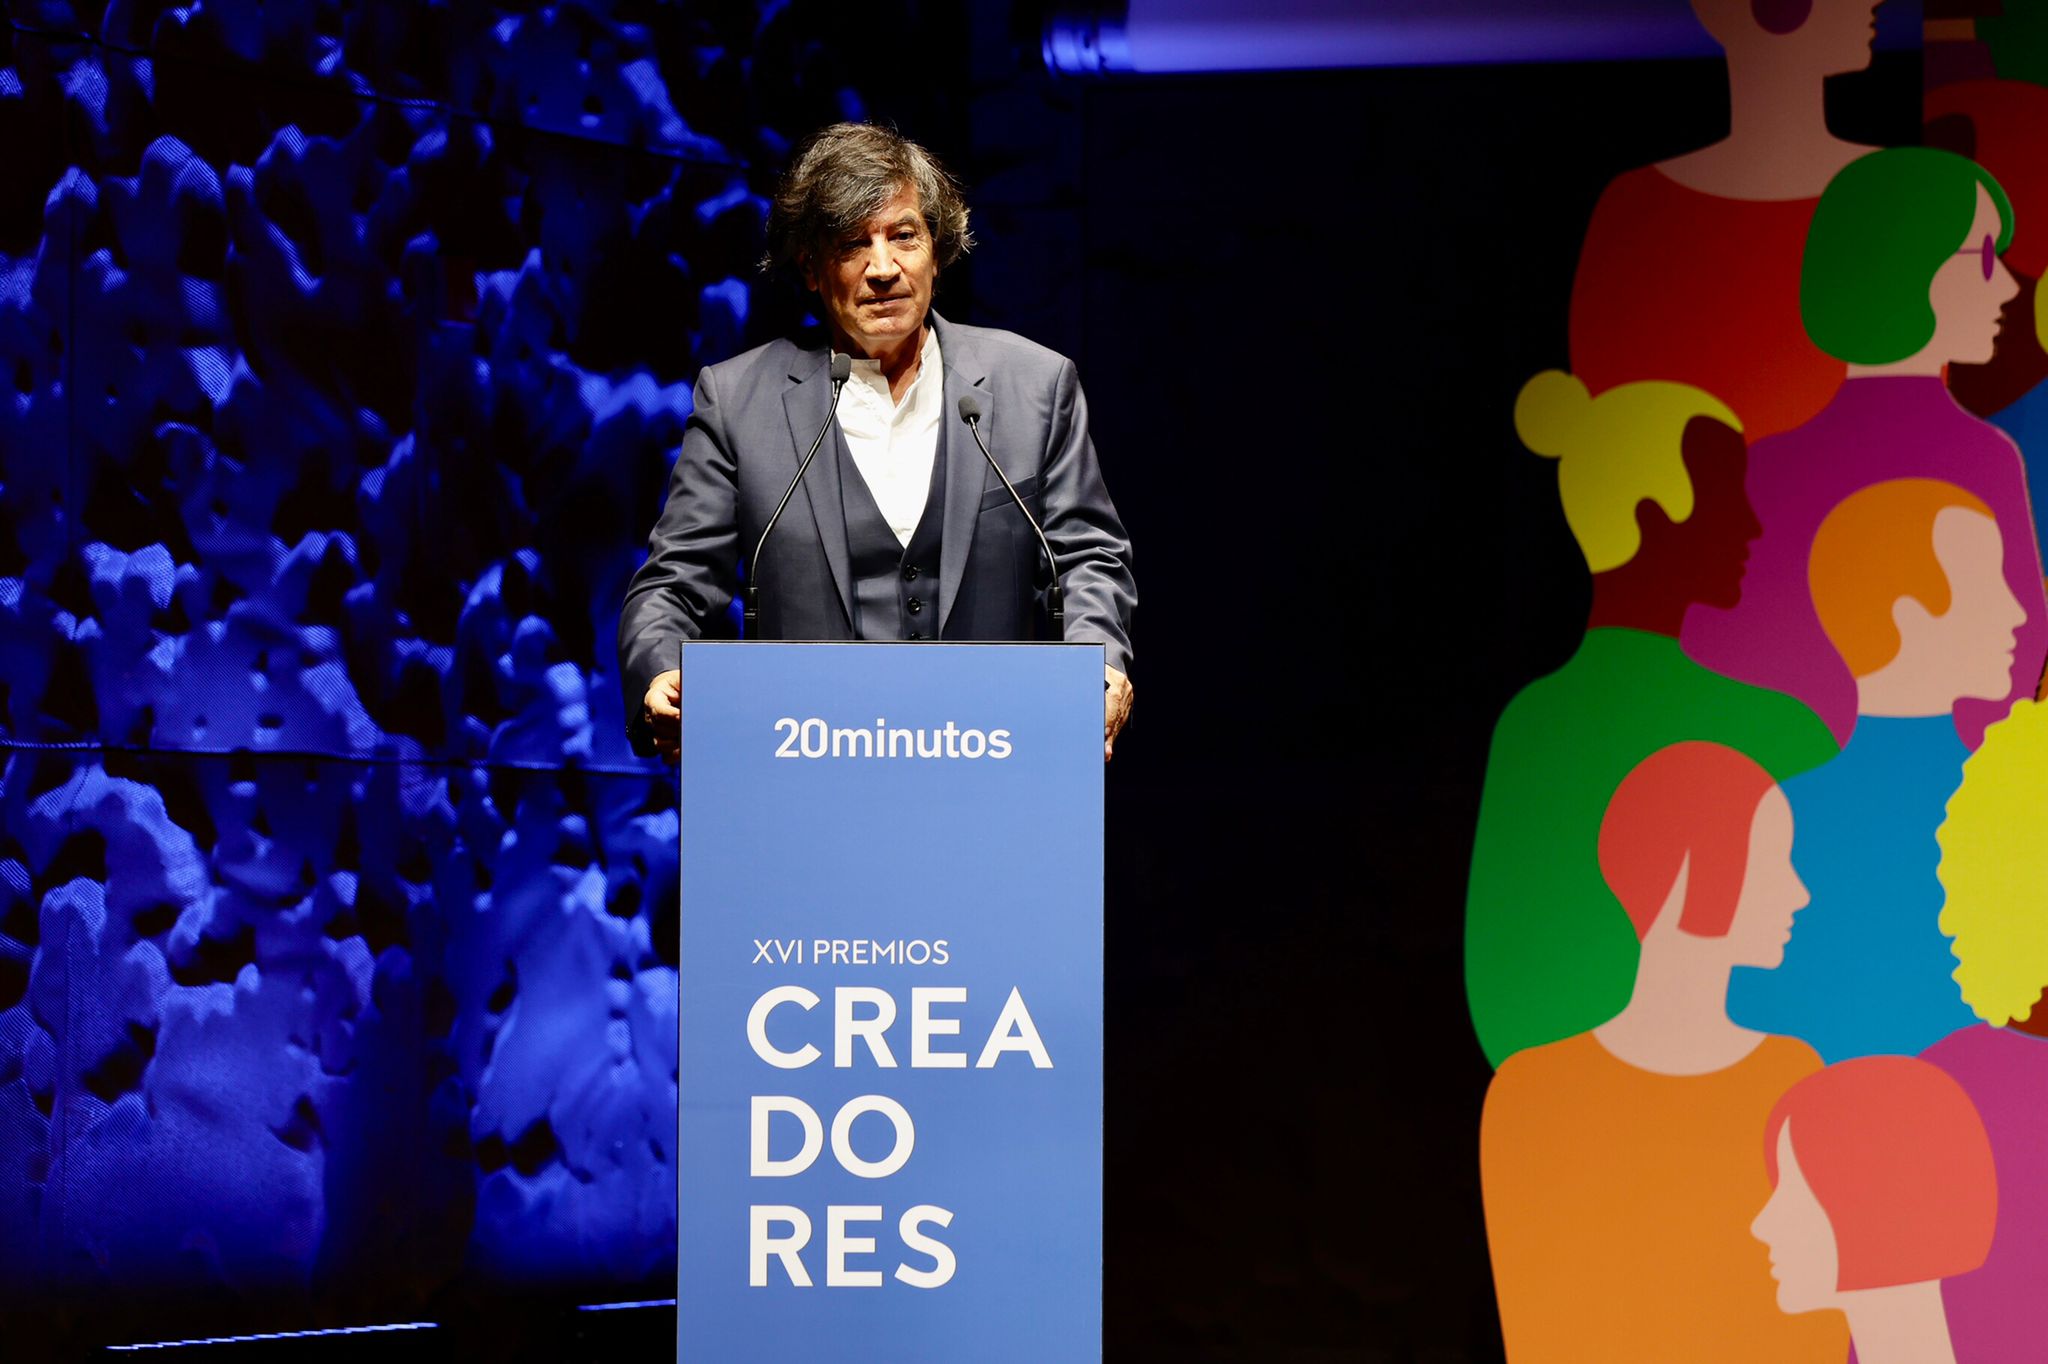 Carlos López Otín delivers his speech after receiving the 20minutes award at the Creators Awards.